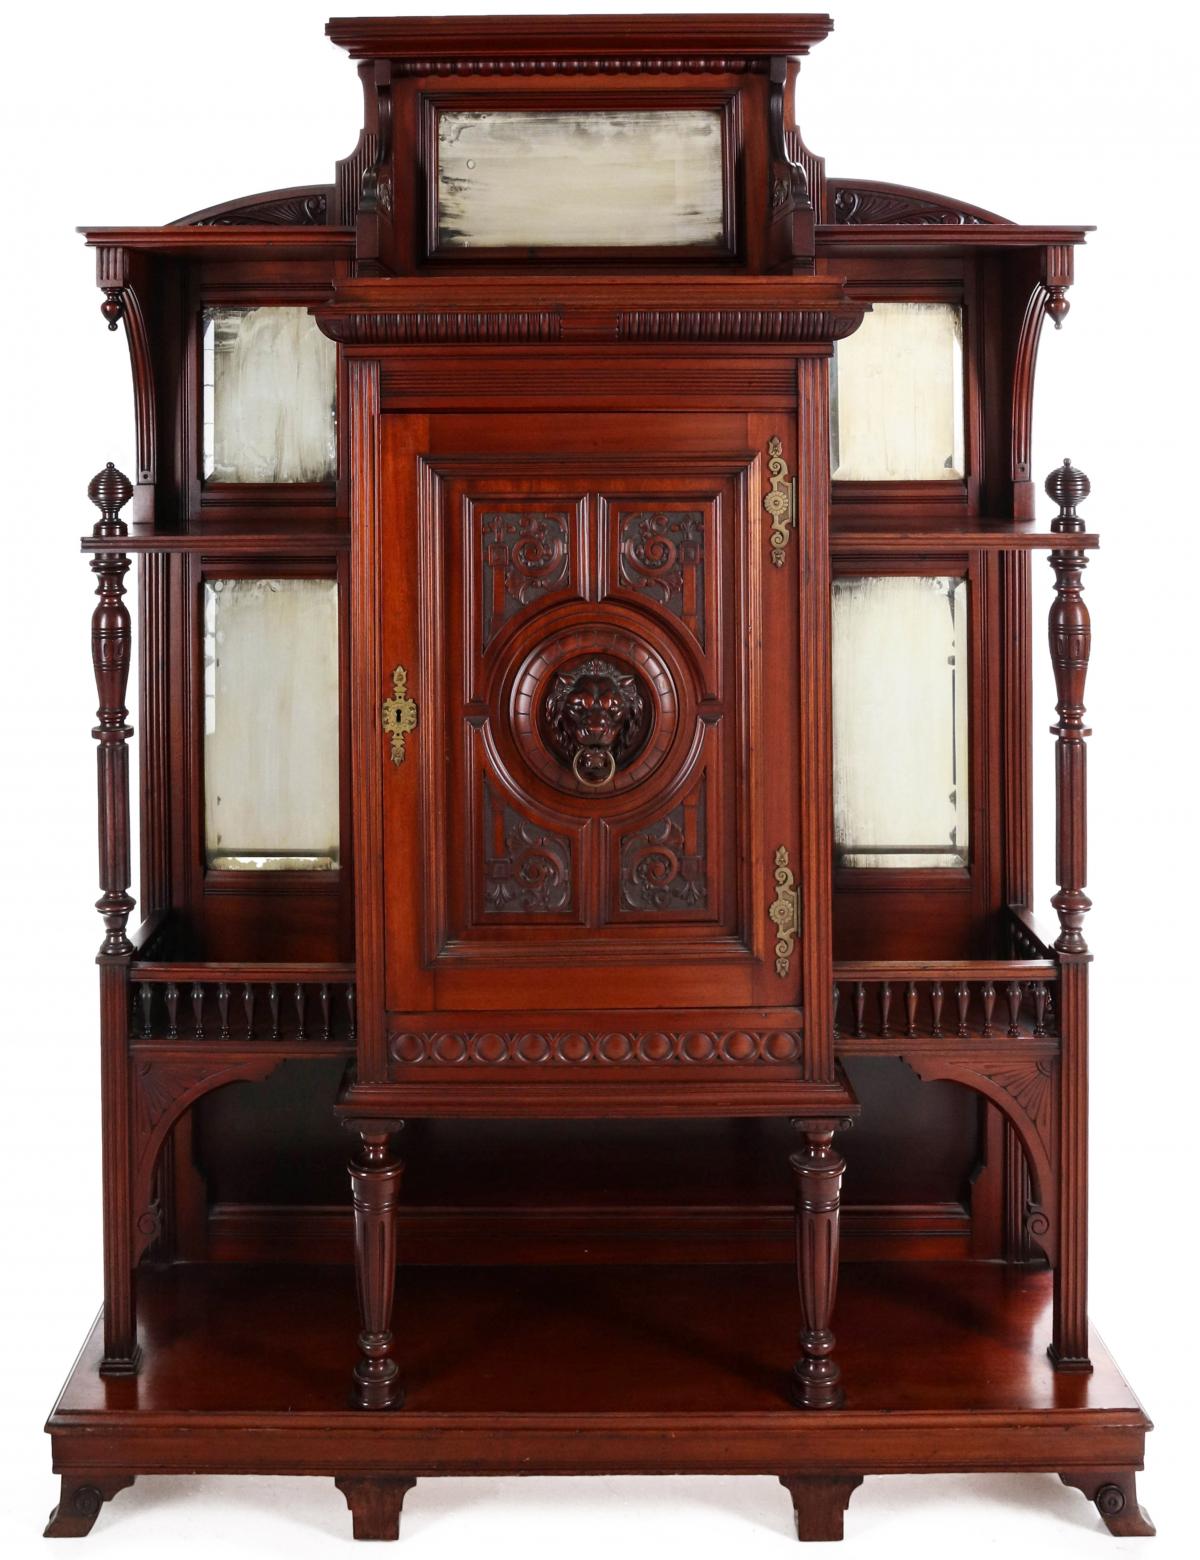 A 19TH CENTURY EASTLAKE INFLUENCE ETAGERE WITH CABINET